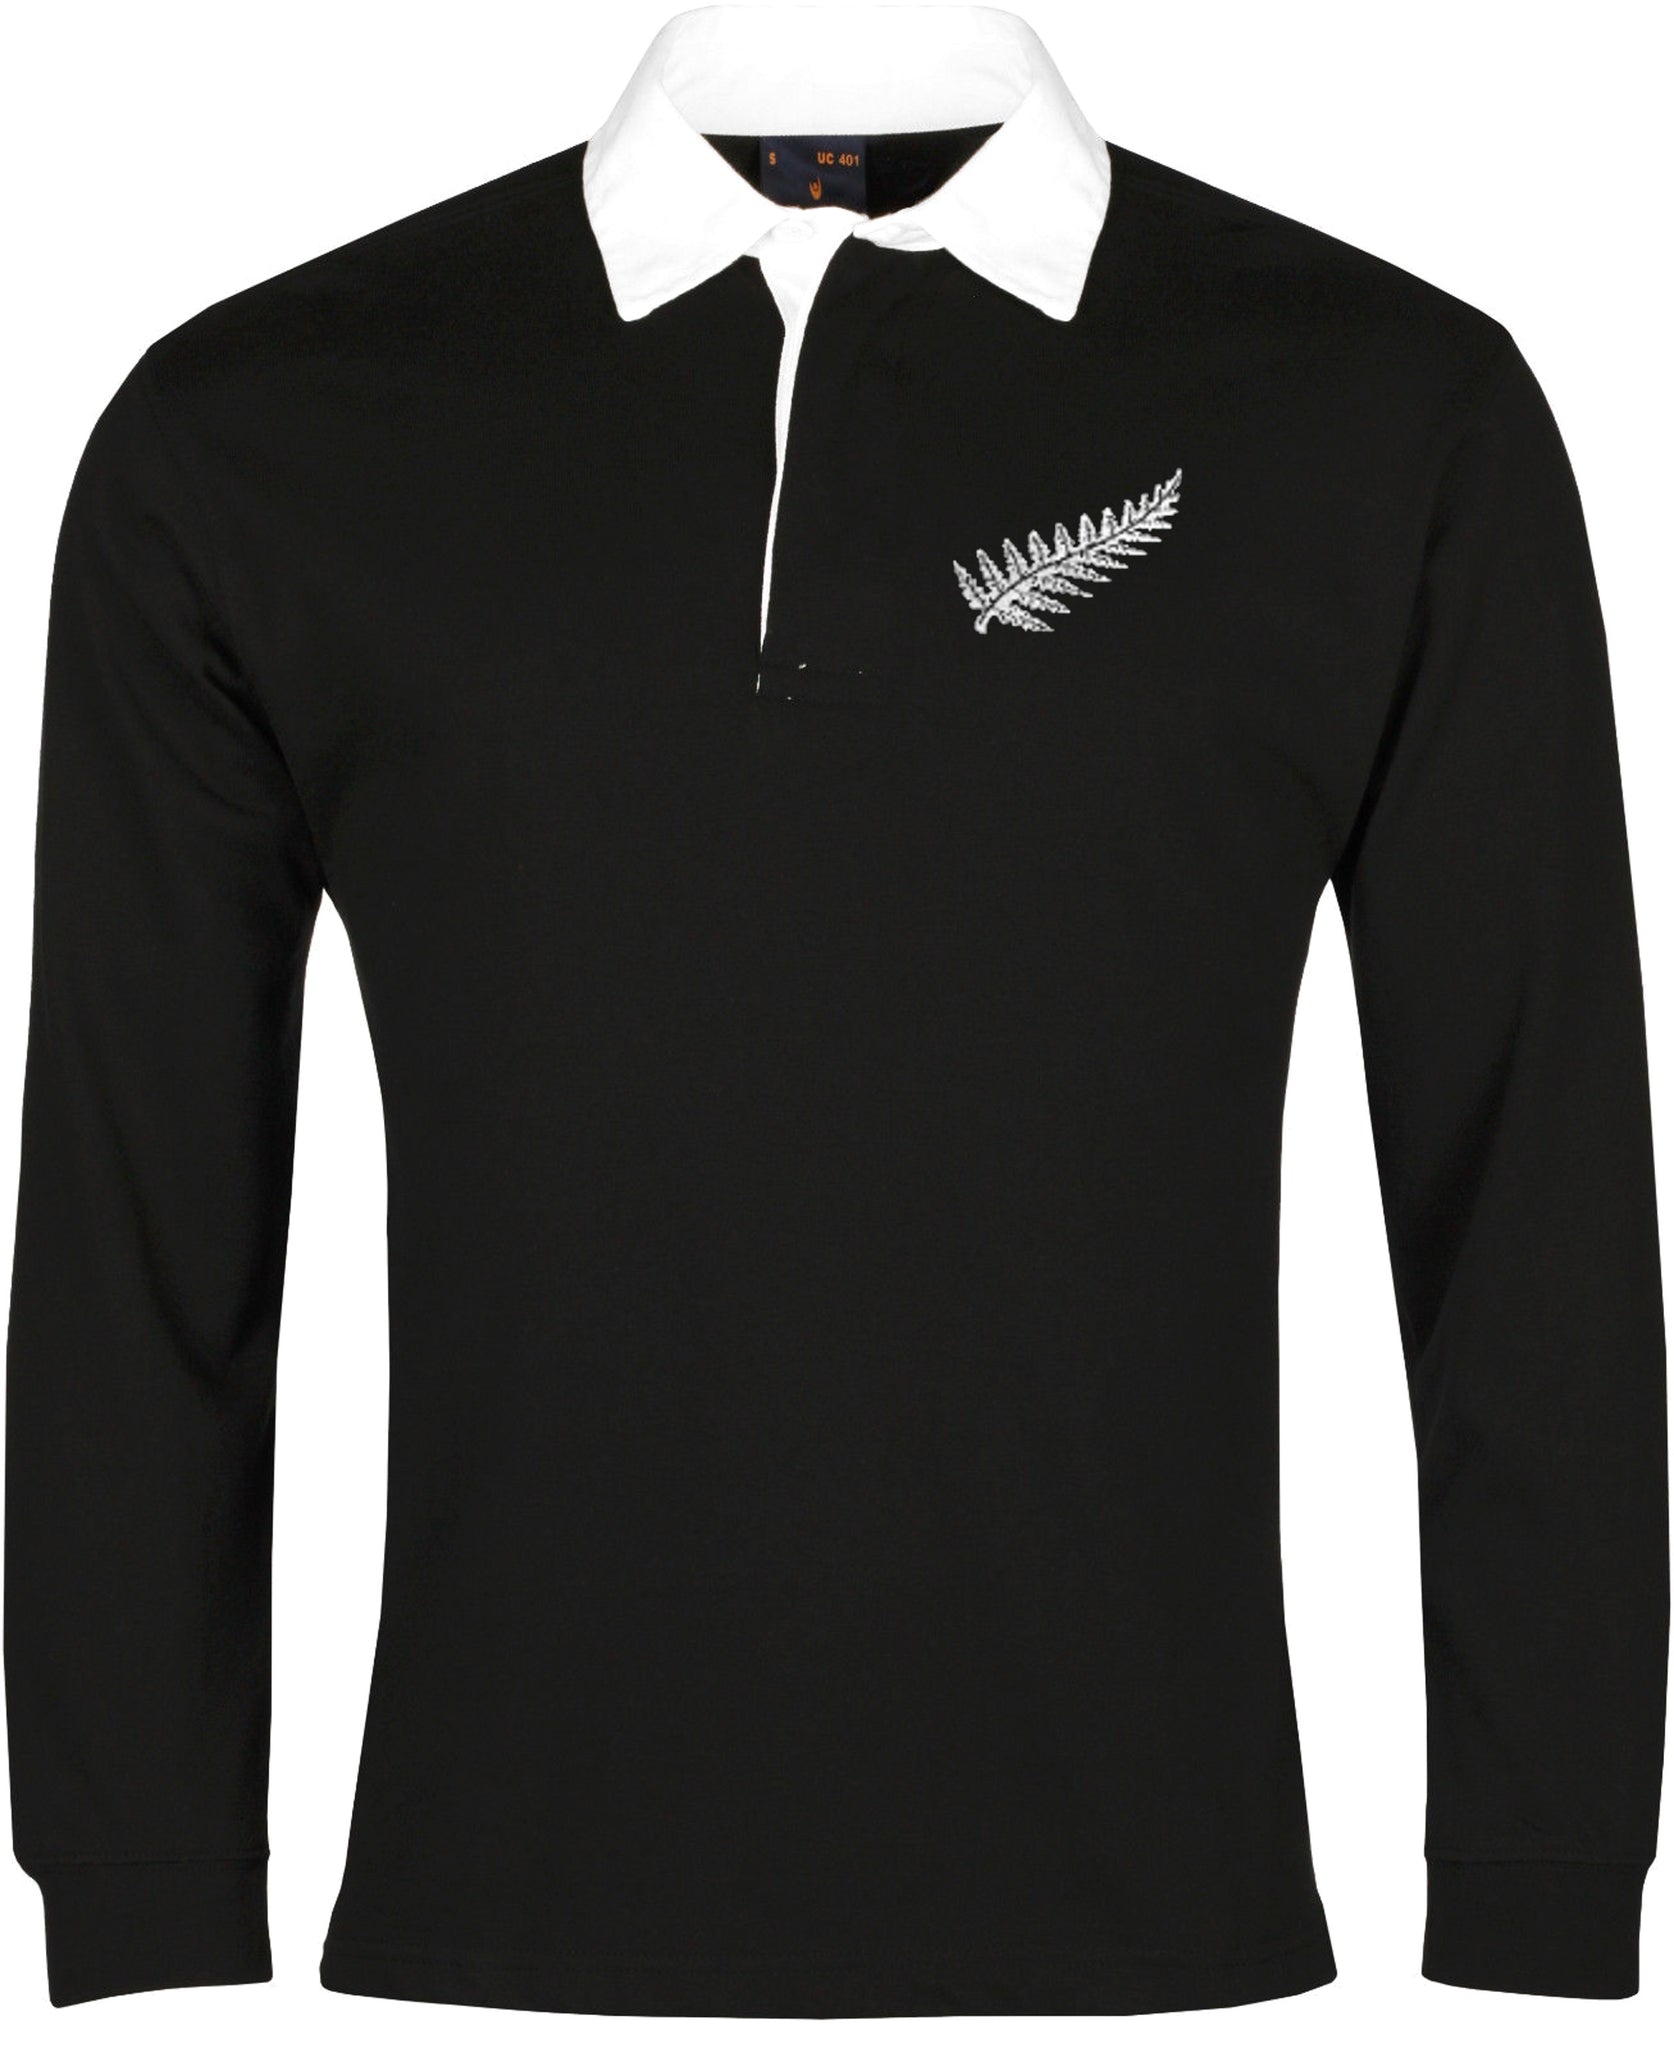 New Zealand Retro Rugby Shirt Long-sleeved - Rugby Shirt